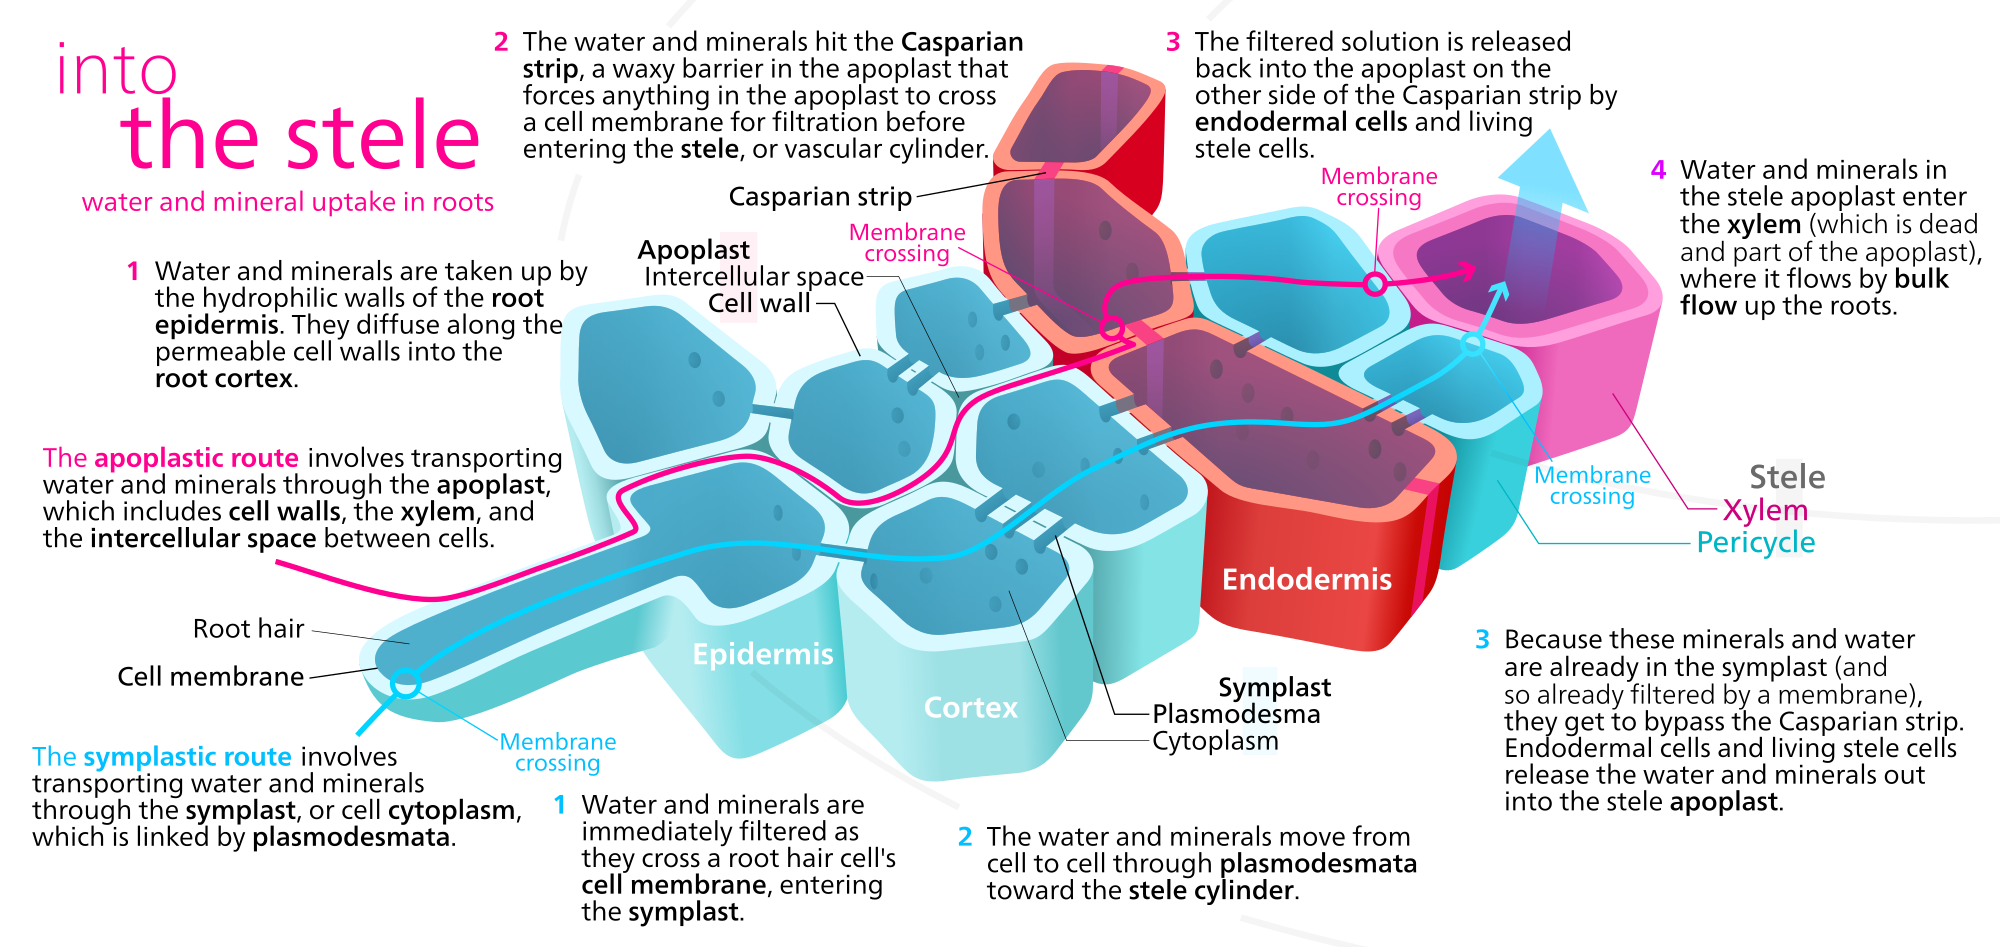 Diagram of symplastic and apoplastic water movement through the root, including the epidermis, cortex, endodermis, pericycle, and xylem.